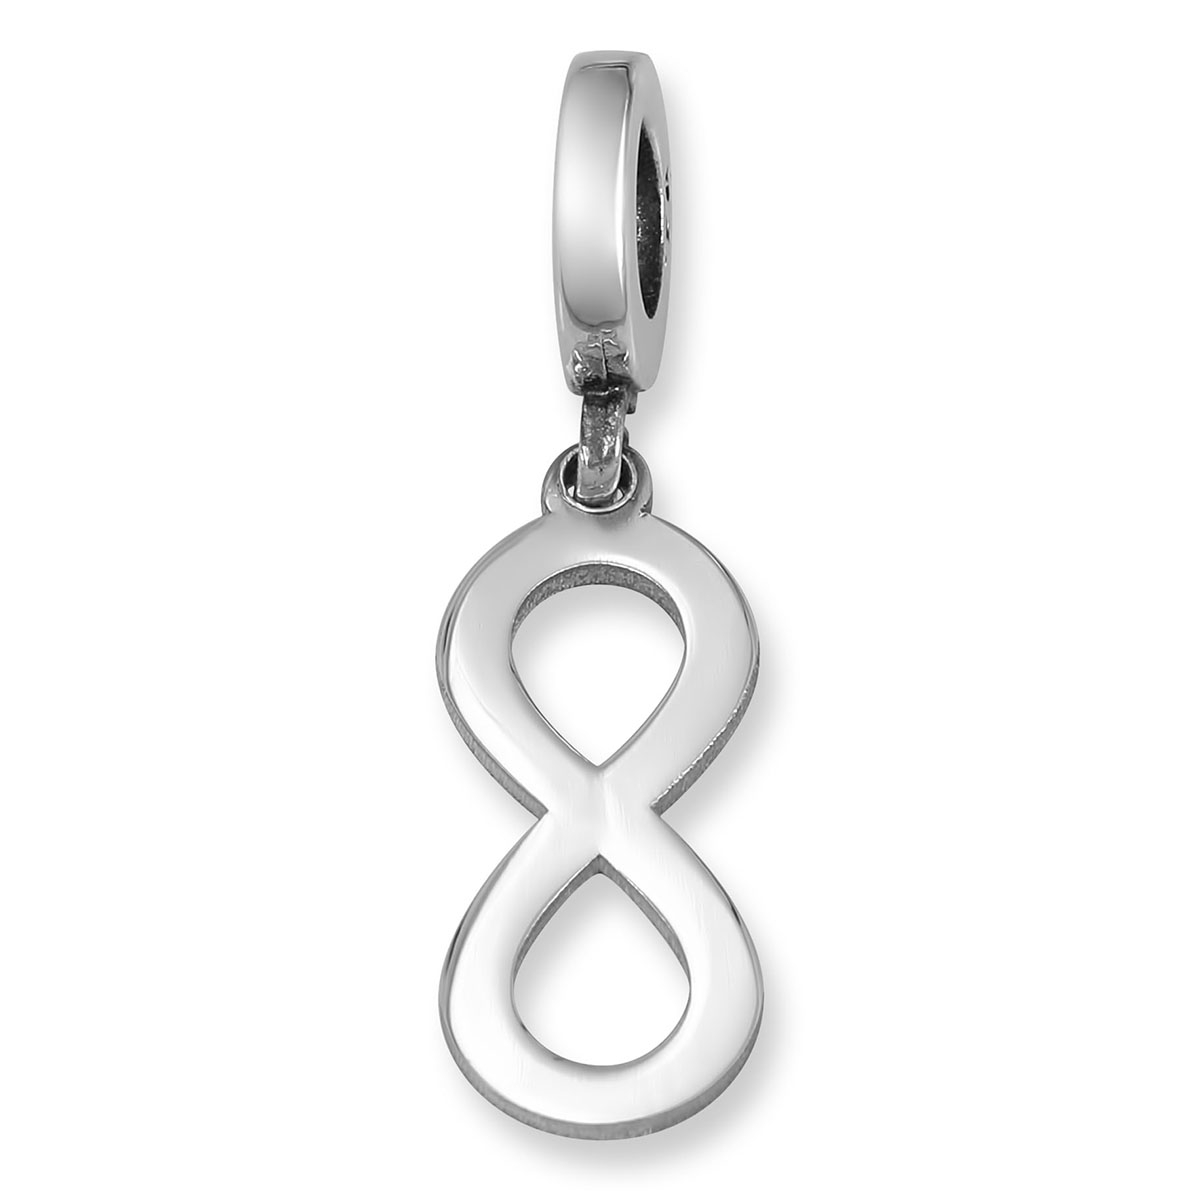 Infinity Sterling Silver Charm  - 1